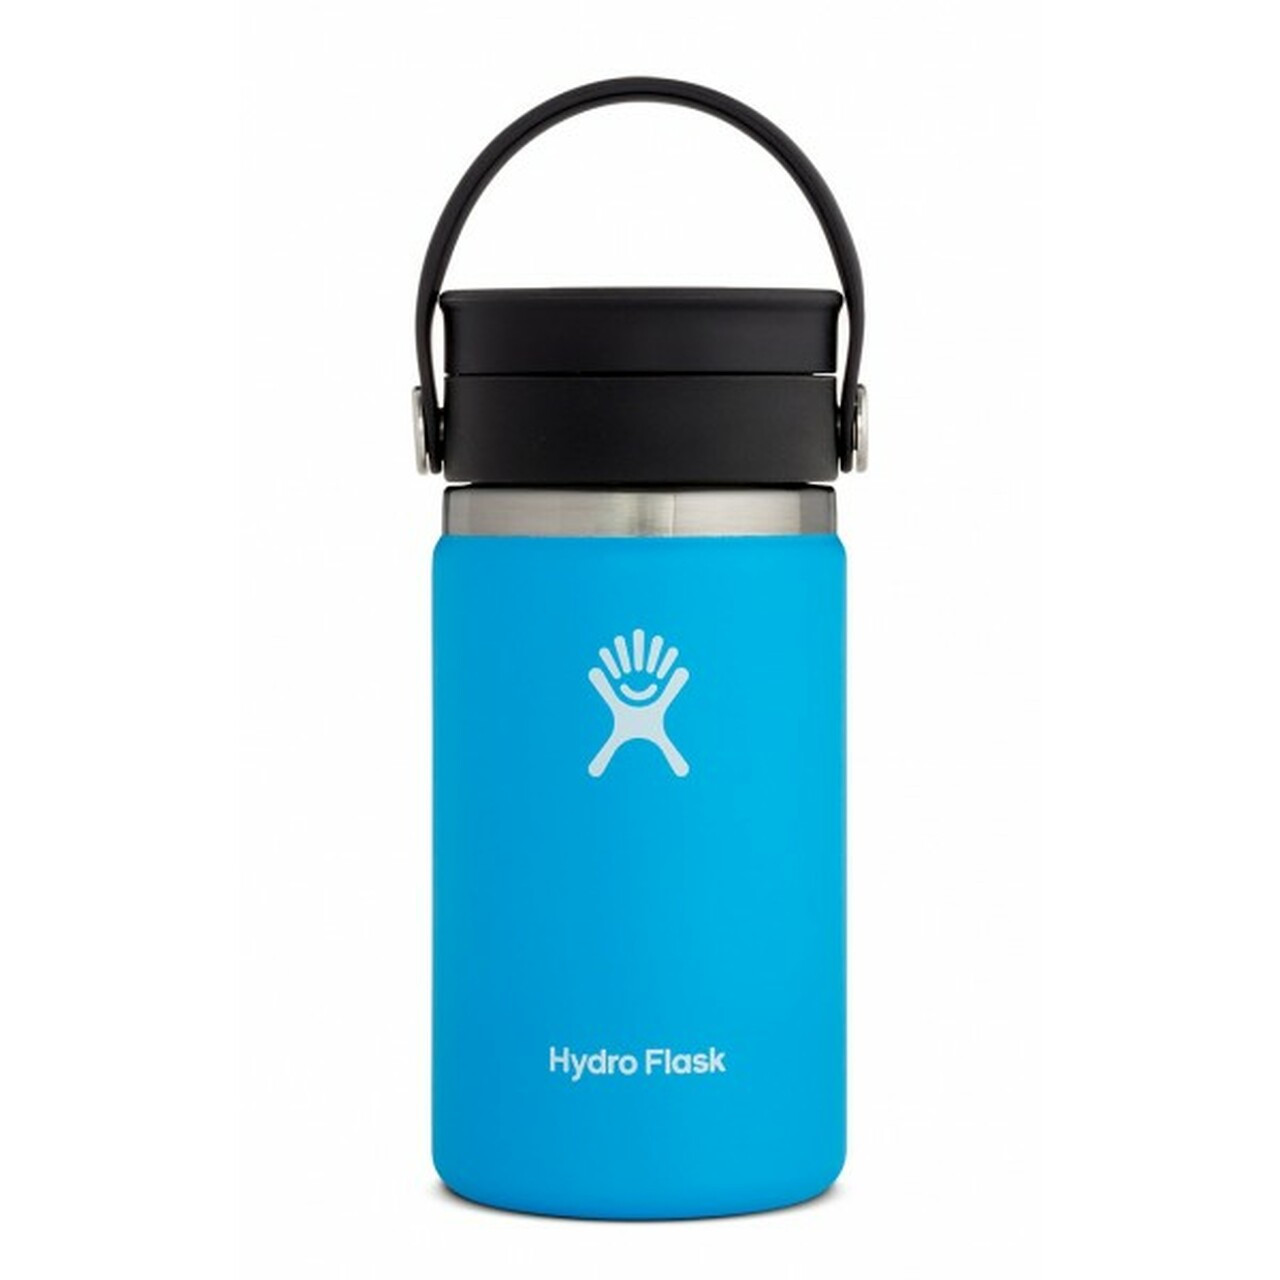 https://cdn11.bigcommerce.com/s-p4e2op94ll/images/stencil/1280x1280/products/2890/15764/Hydroflask_12_ounce_coffee_cup_with_flex_sip_lid_pacific__15360.1683585816.jpg?c=2?imbypass=on